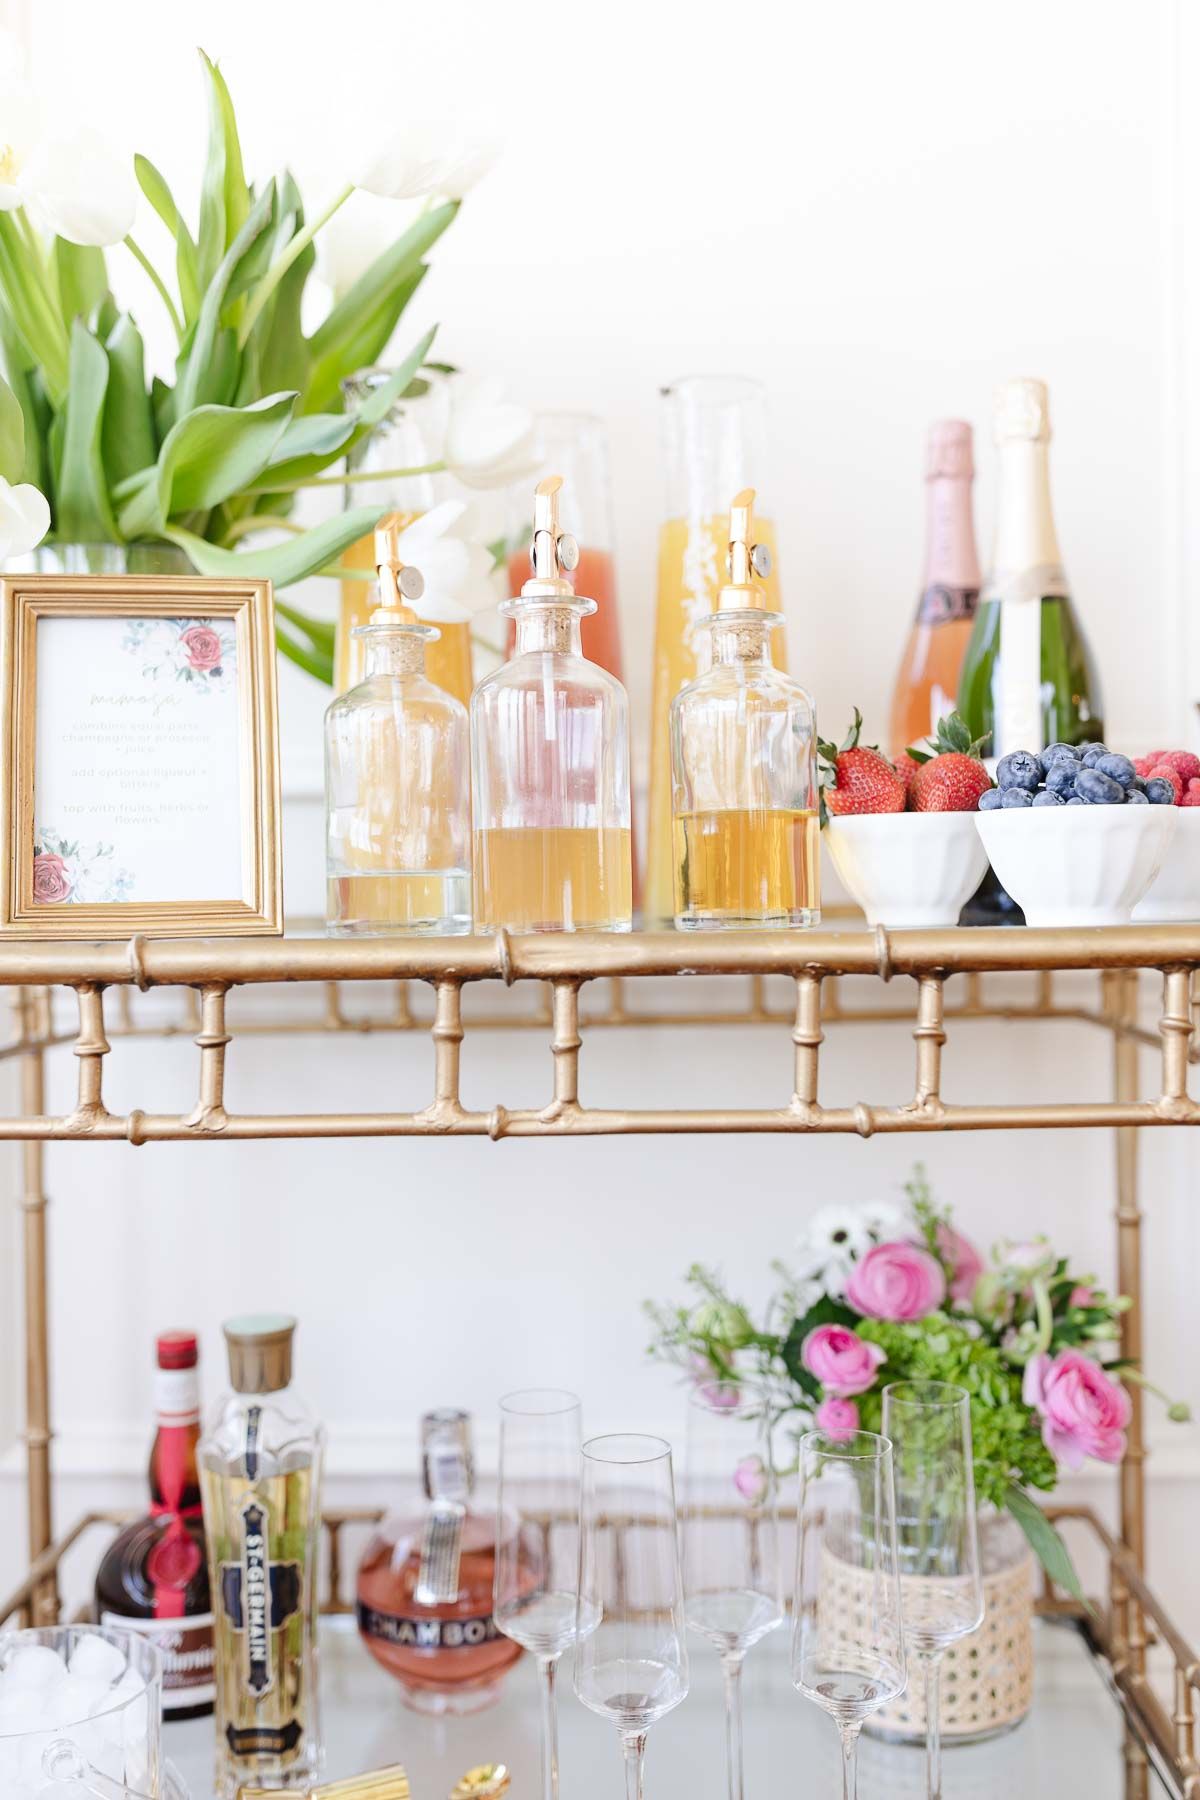 How to Set Up a Mimosa Bar